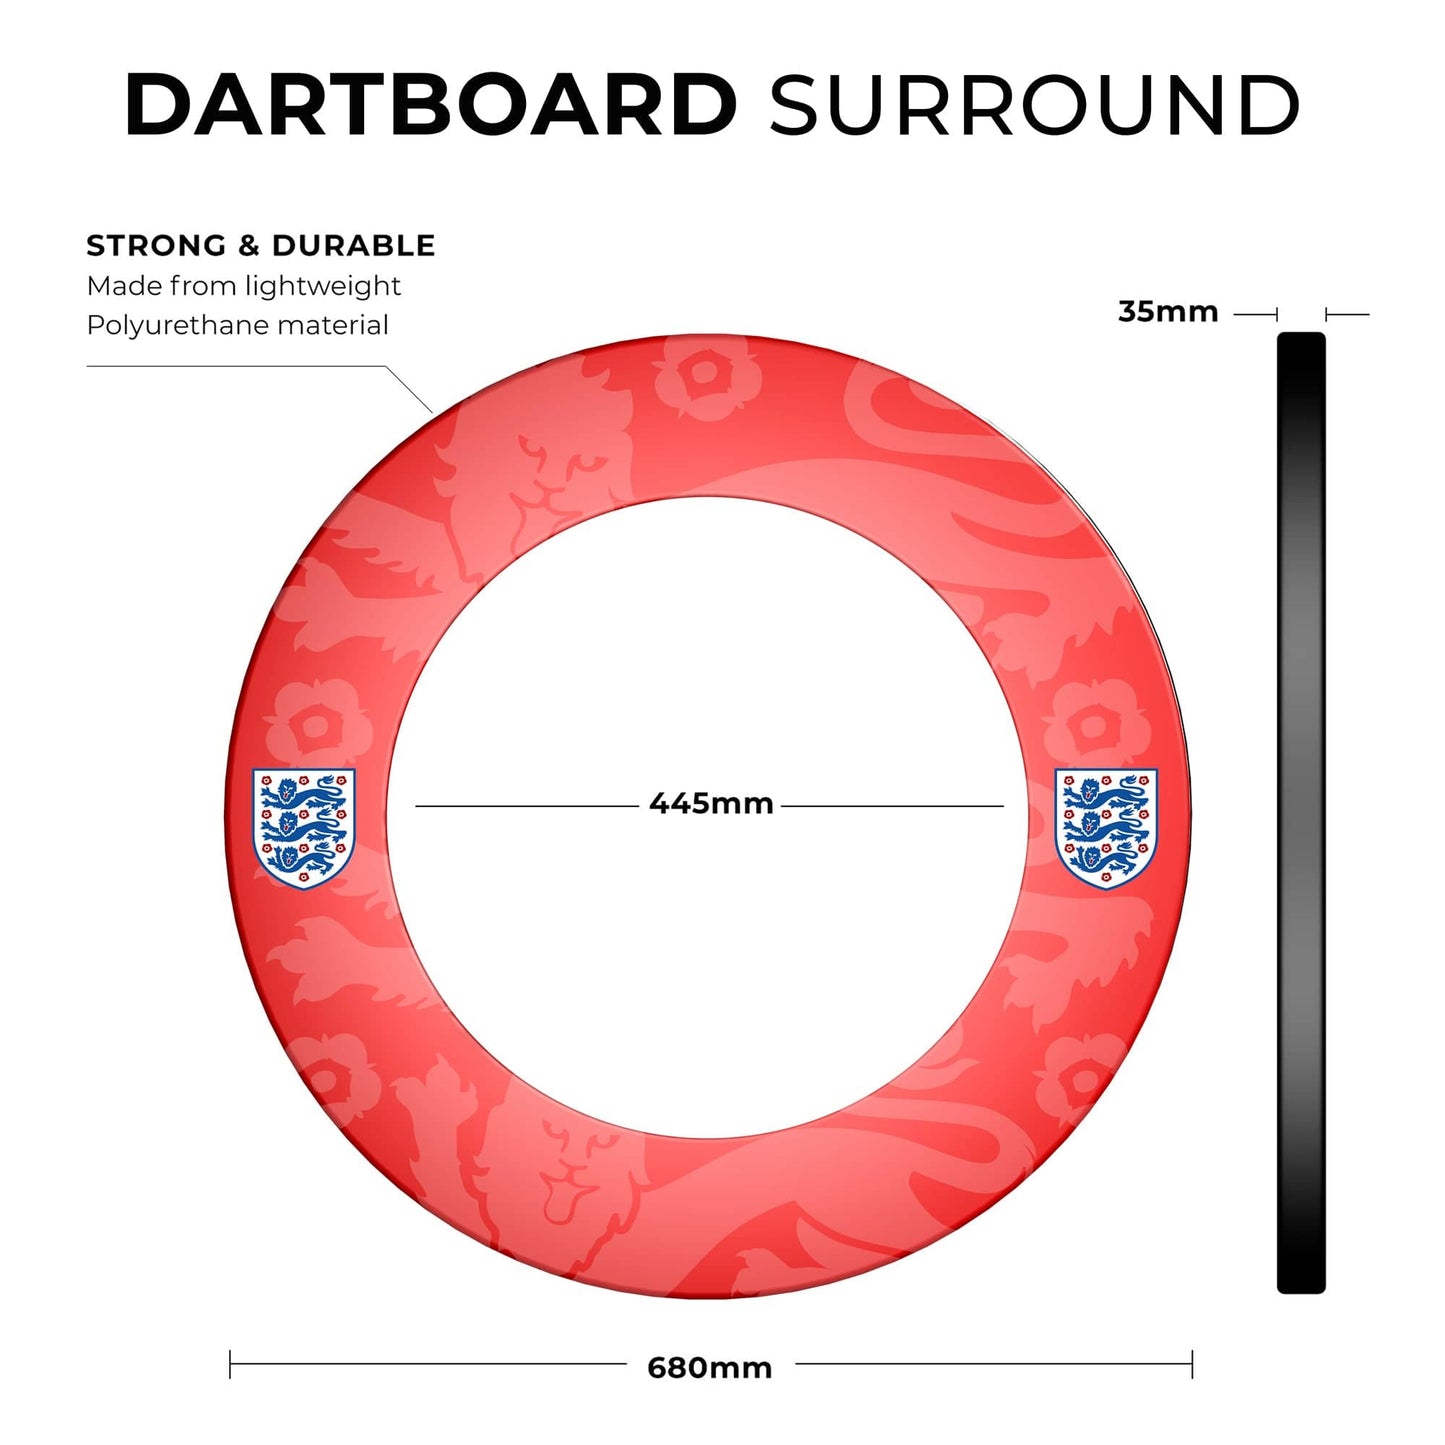 England Football Dartboard Surround - Official Licensed - S3 - Red Lions